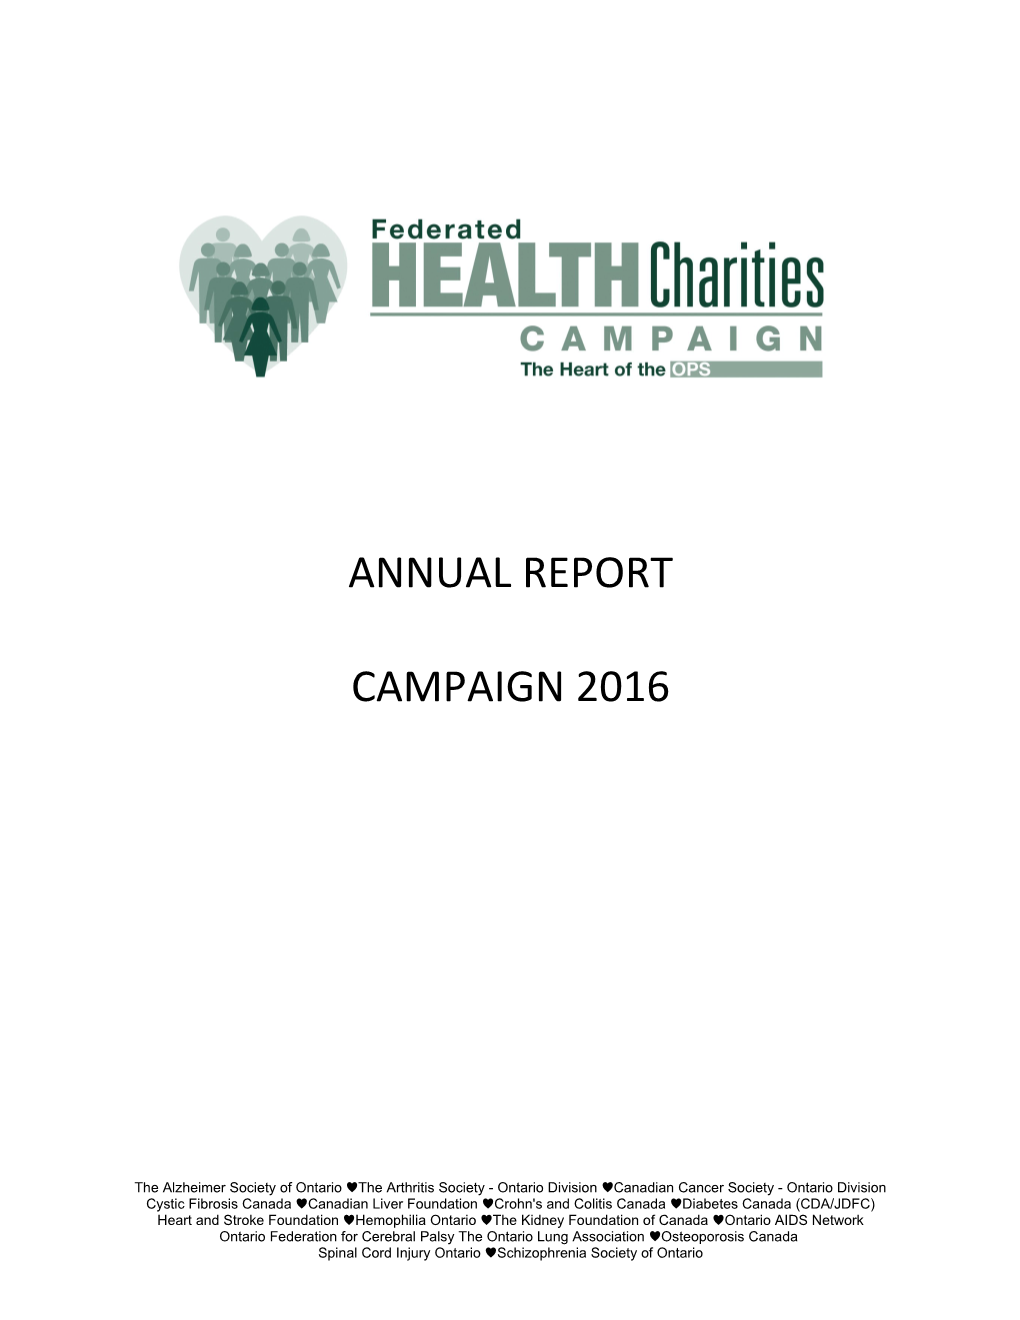 Federated Health Charities Annual Report